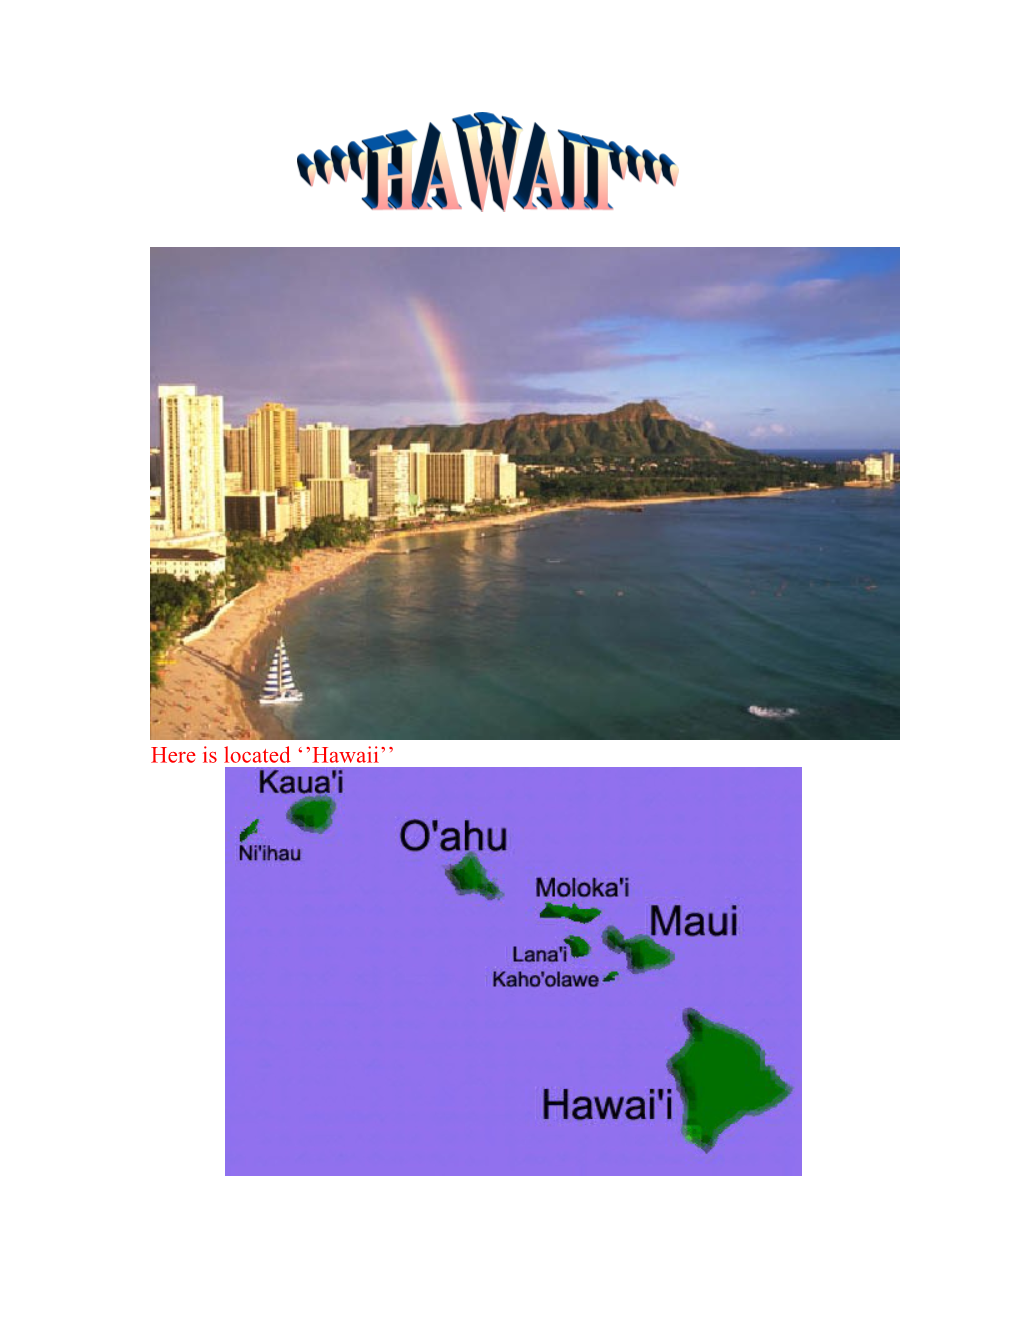 Hawaii Has Differents Places for Example !